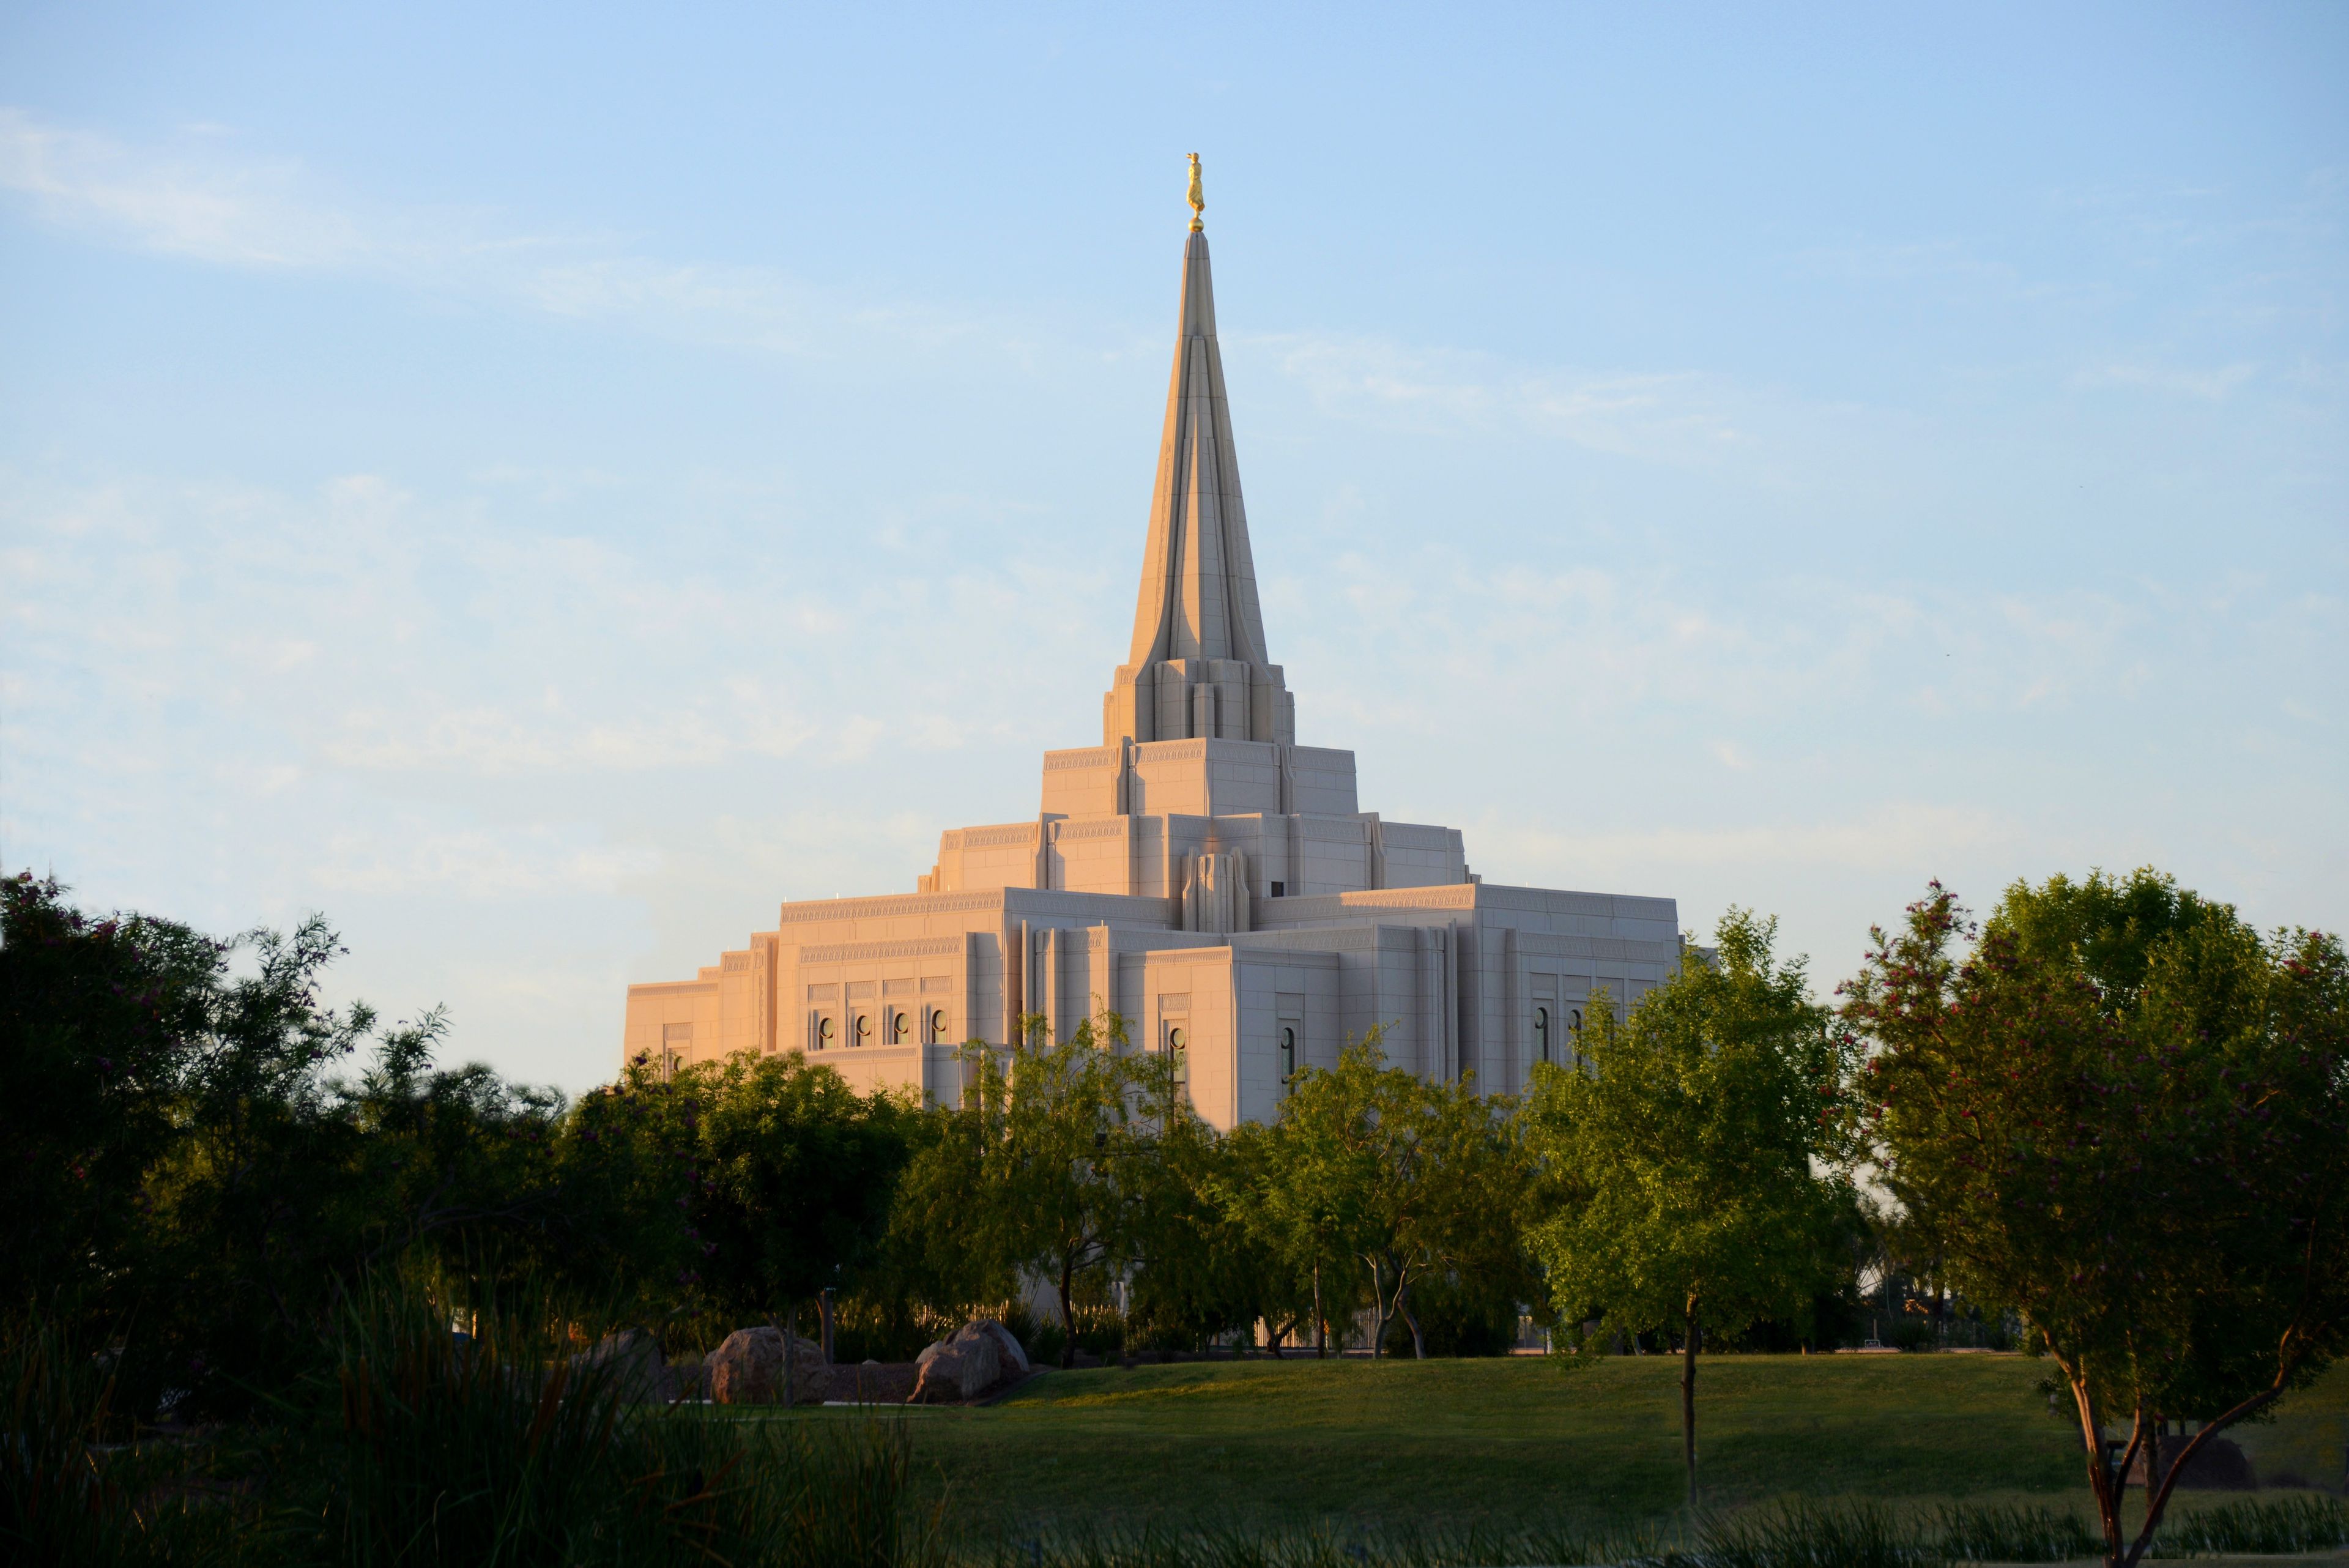 A landscape view of the Gilbert Arizona Temple from the temple grounds.